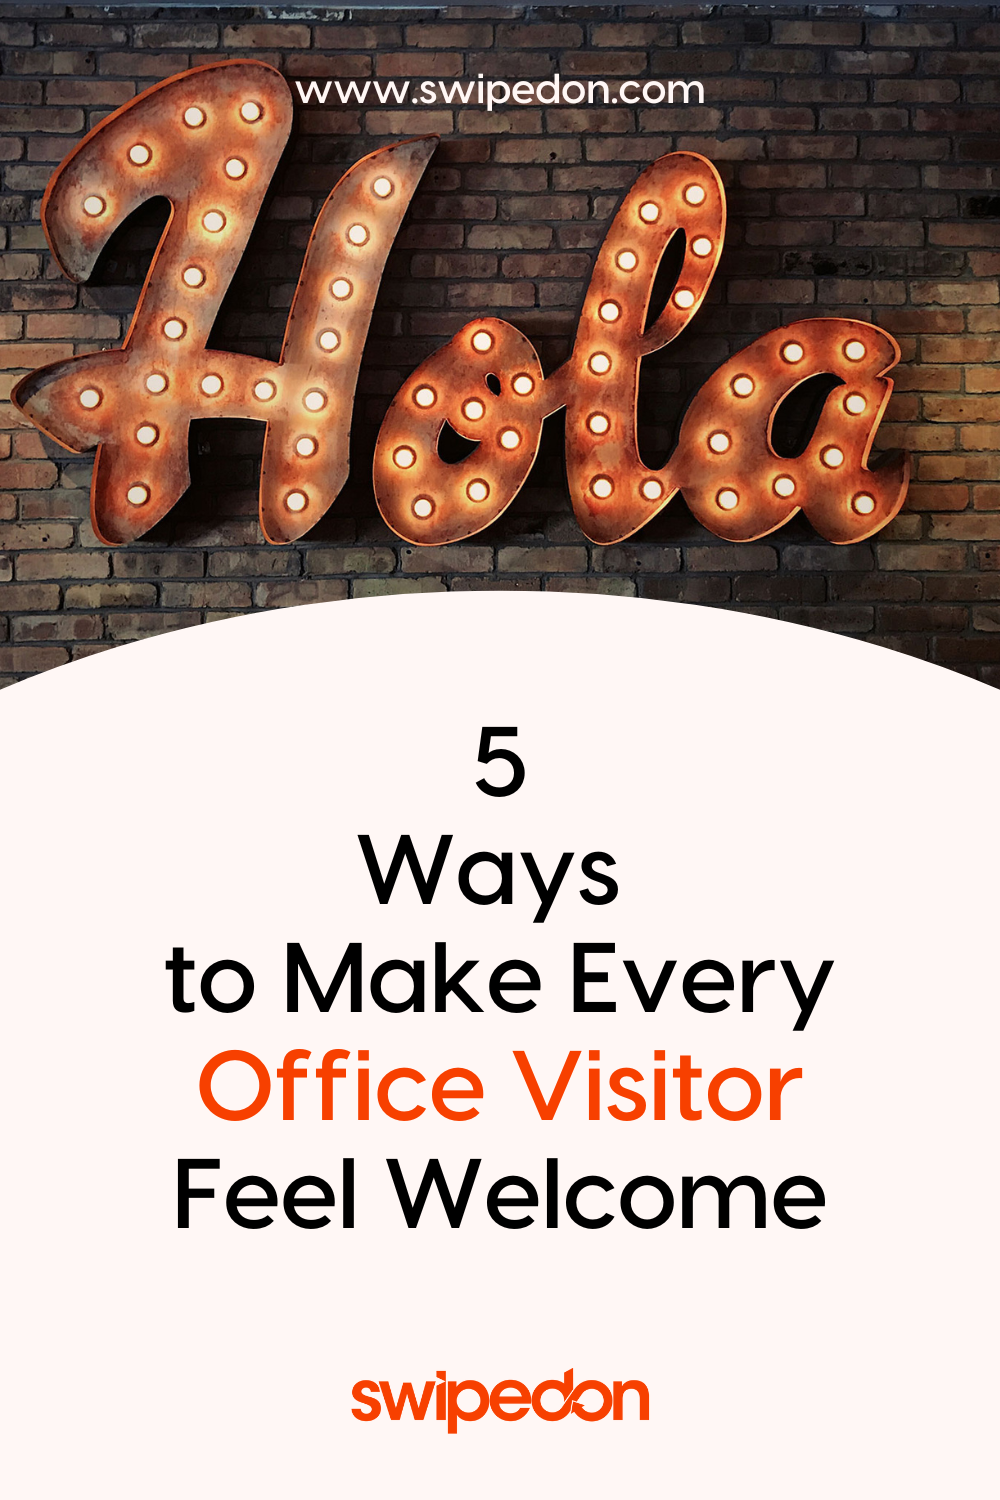 Make office visitors feel welcome: Share on Pinterest